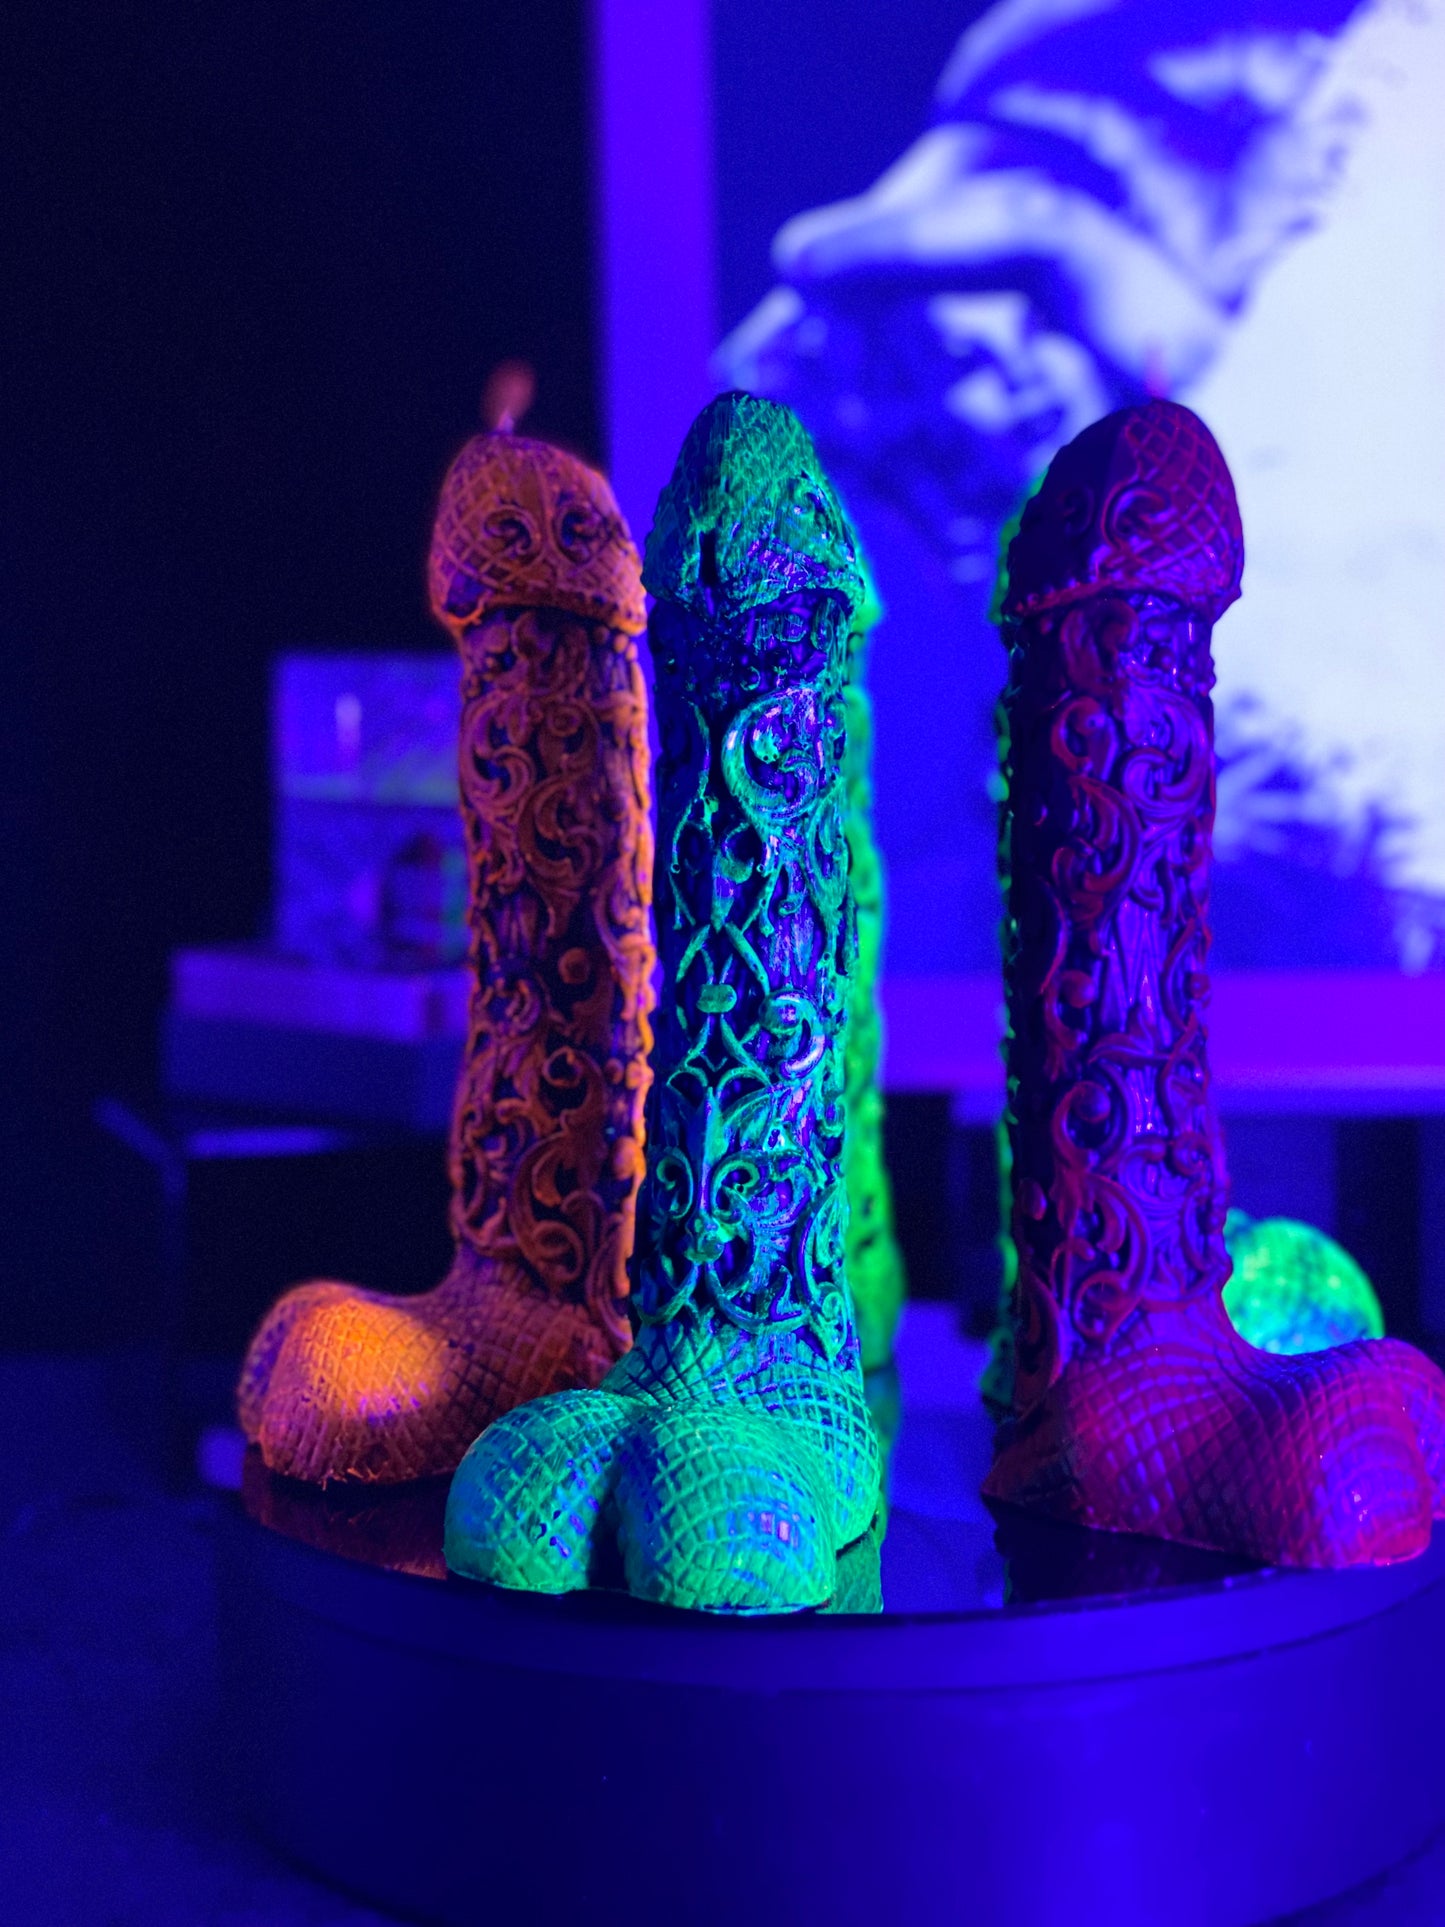 Candle Male, Body, Bridal party, Erotica, Nude, Carving Peni, Party, Phallus, Glow in Dark, Neon, Bridesmade